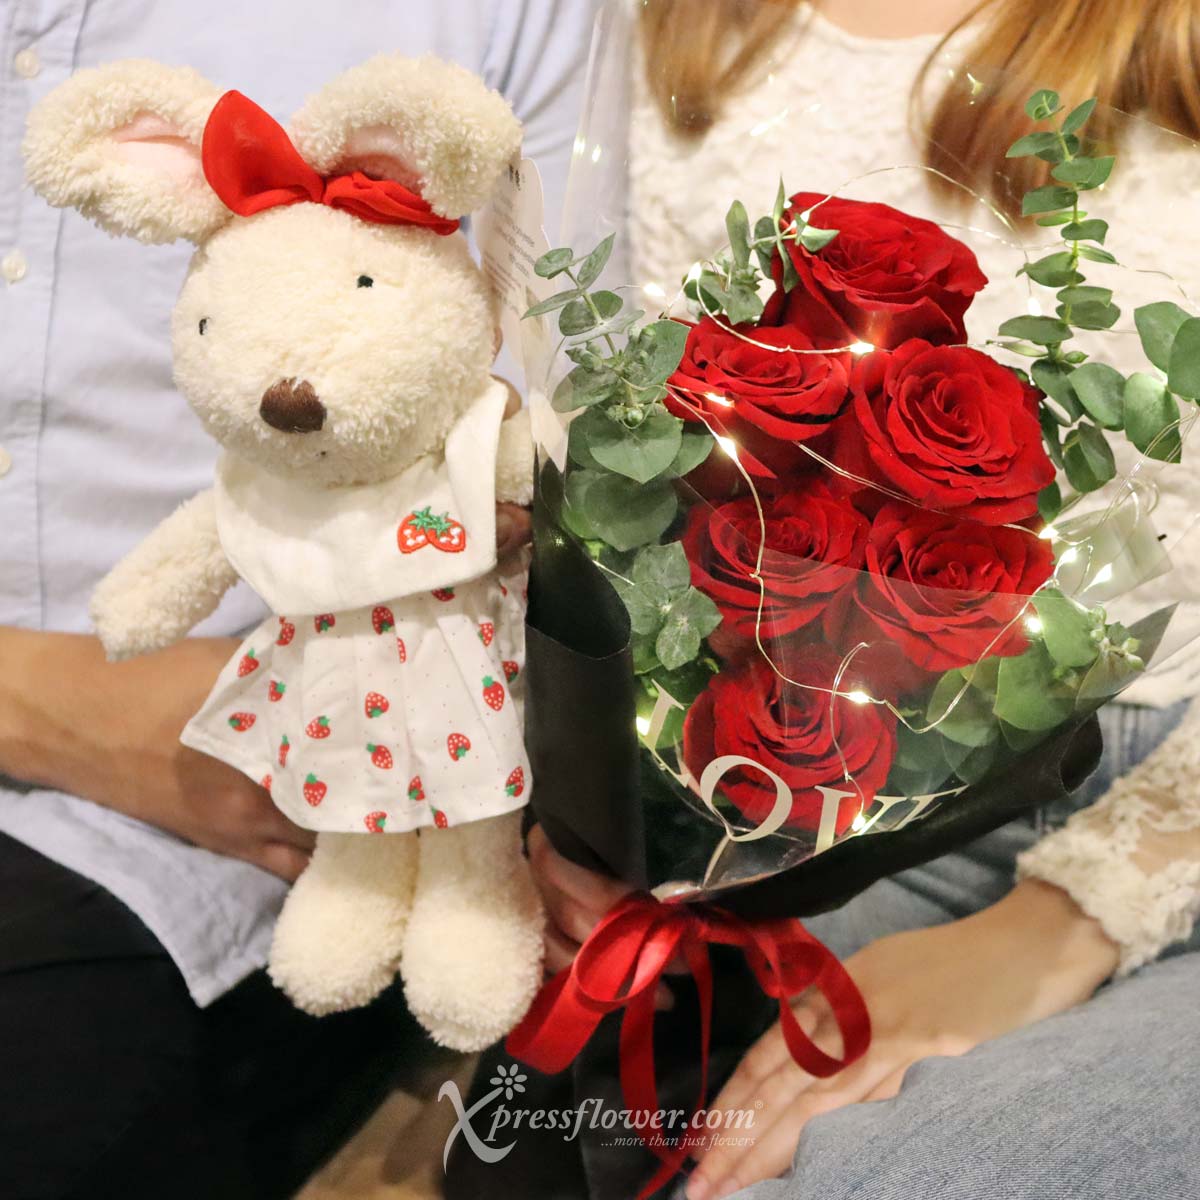 SBL2309 Love Bunny (6 Red Roses with LED Lights & Bunny Plush) 4a